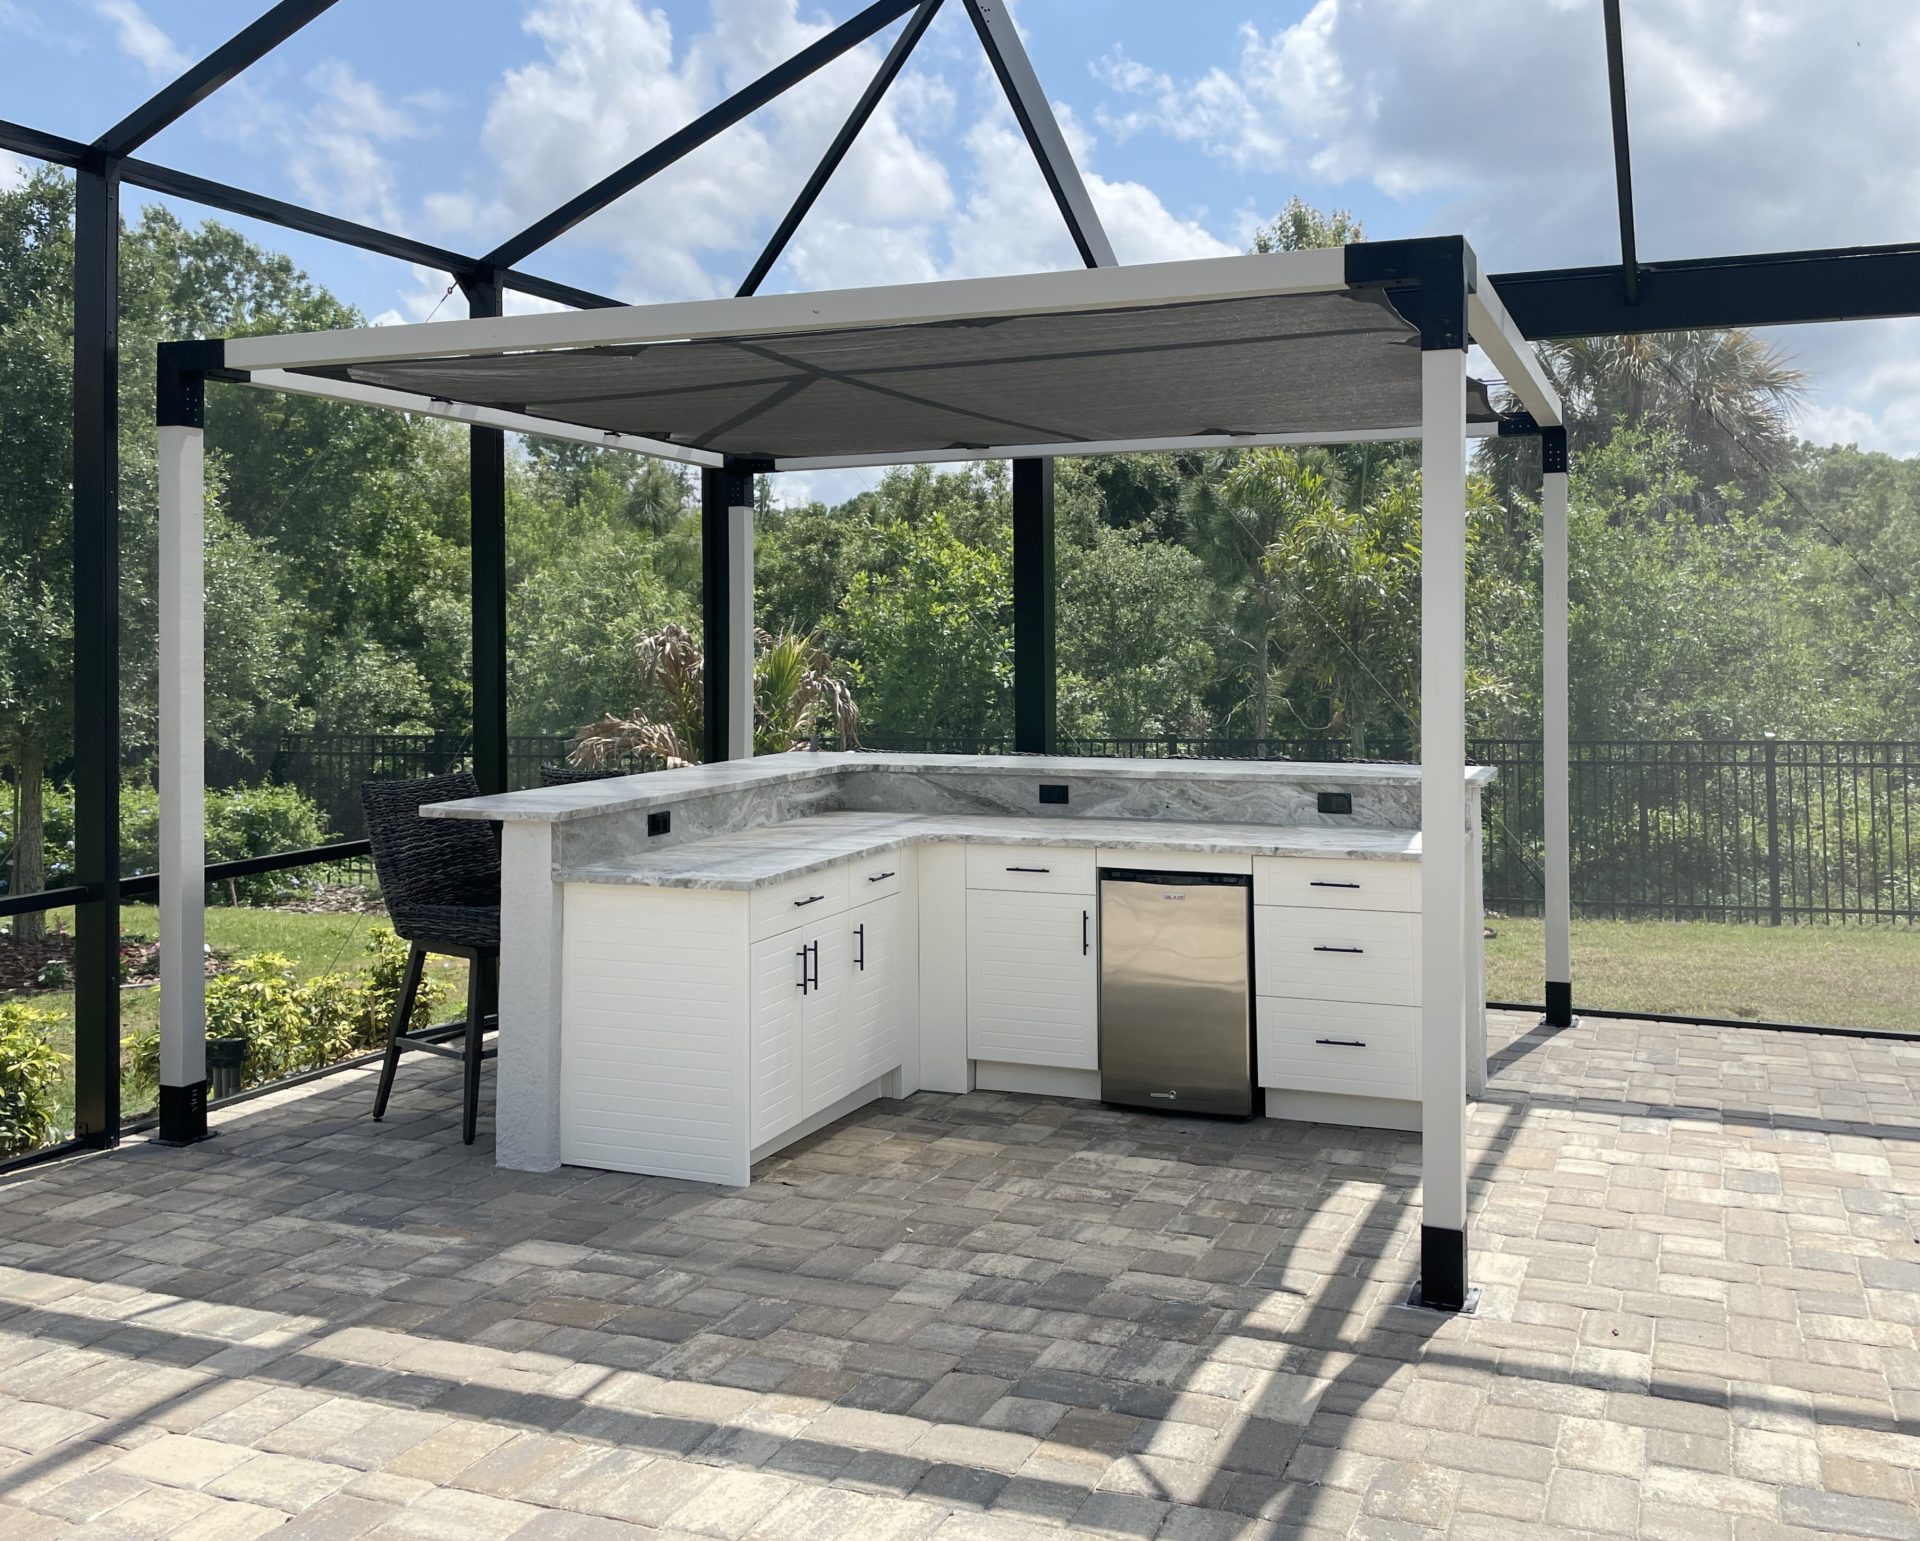 OUTDOOR KITCHEN 41. Custom outdoor kitchen in Lakewood Ranch, FL. Kitchen features seafoam, cabana style cabinets. Appliances include Blaze stainless front refrigerator and black bar pulls.